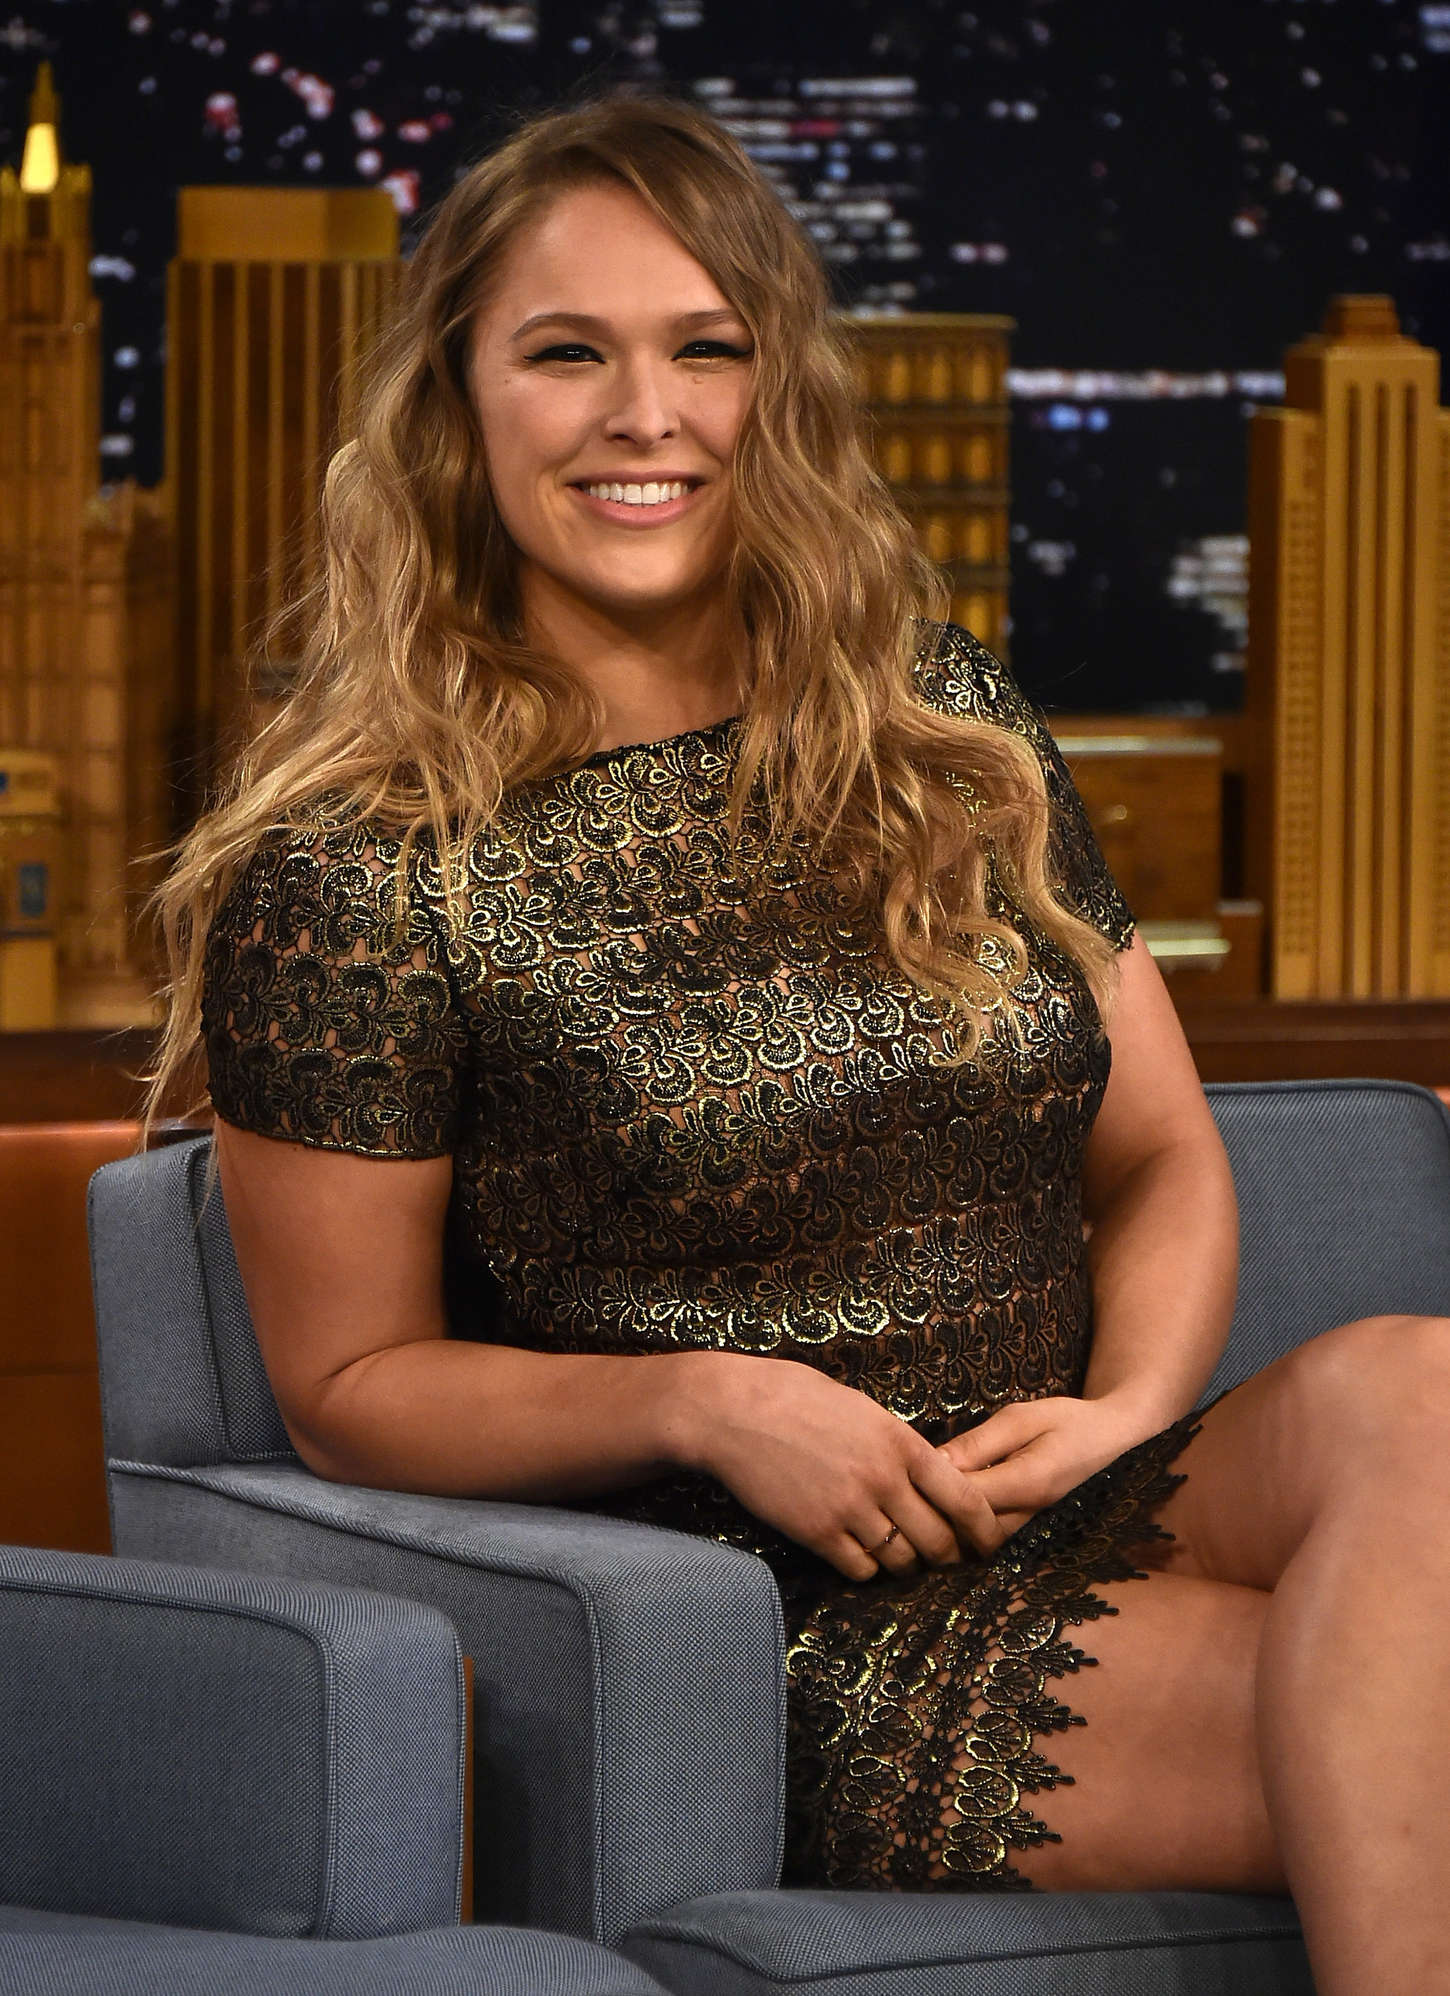 Ronda-Rousey-Leggy-at-The-Tonight-Show-With-Jimmy-Fallon--05.jpg